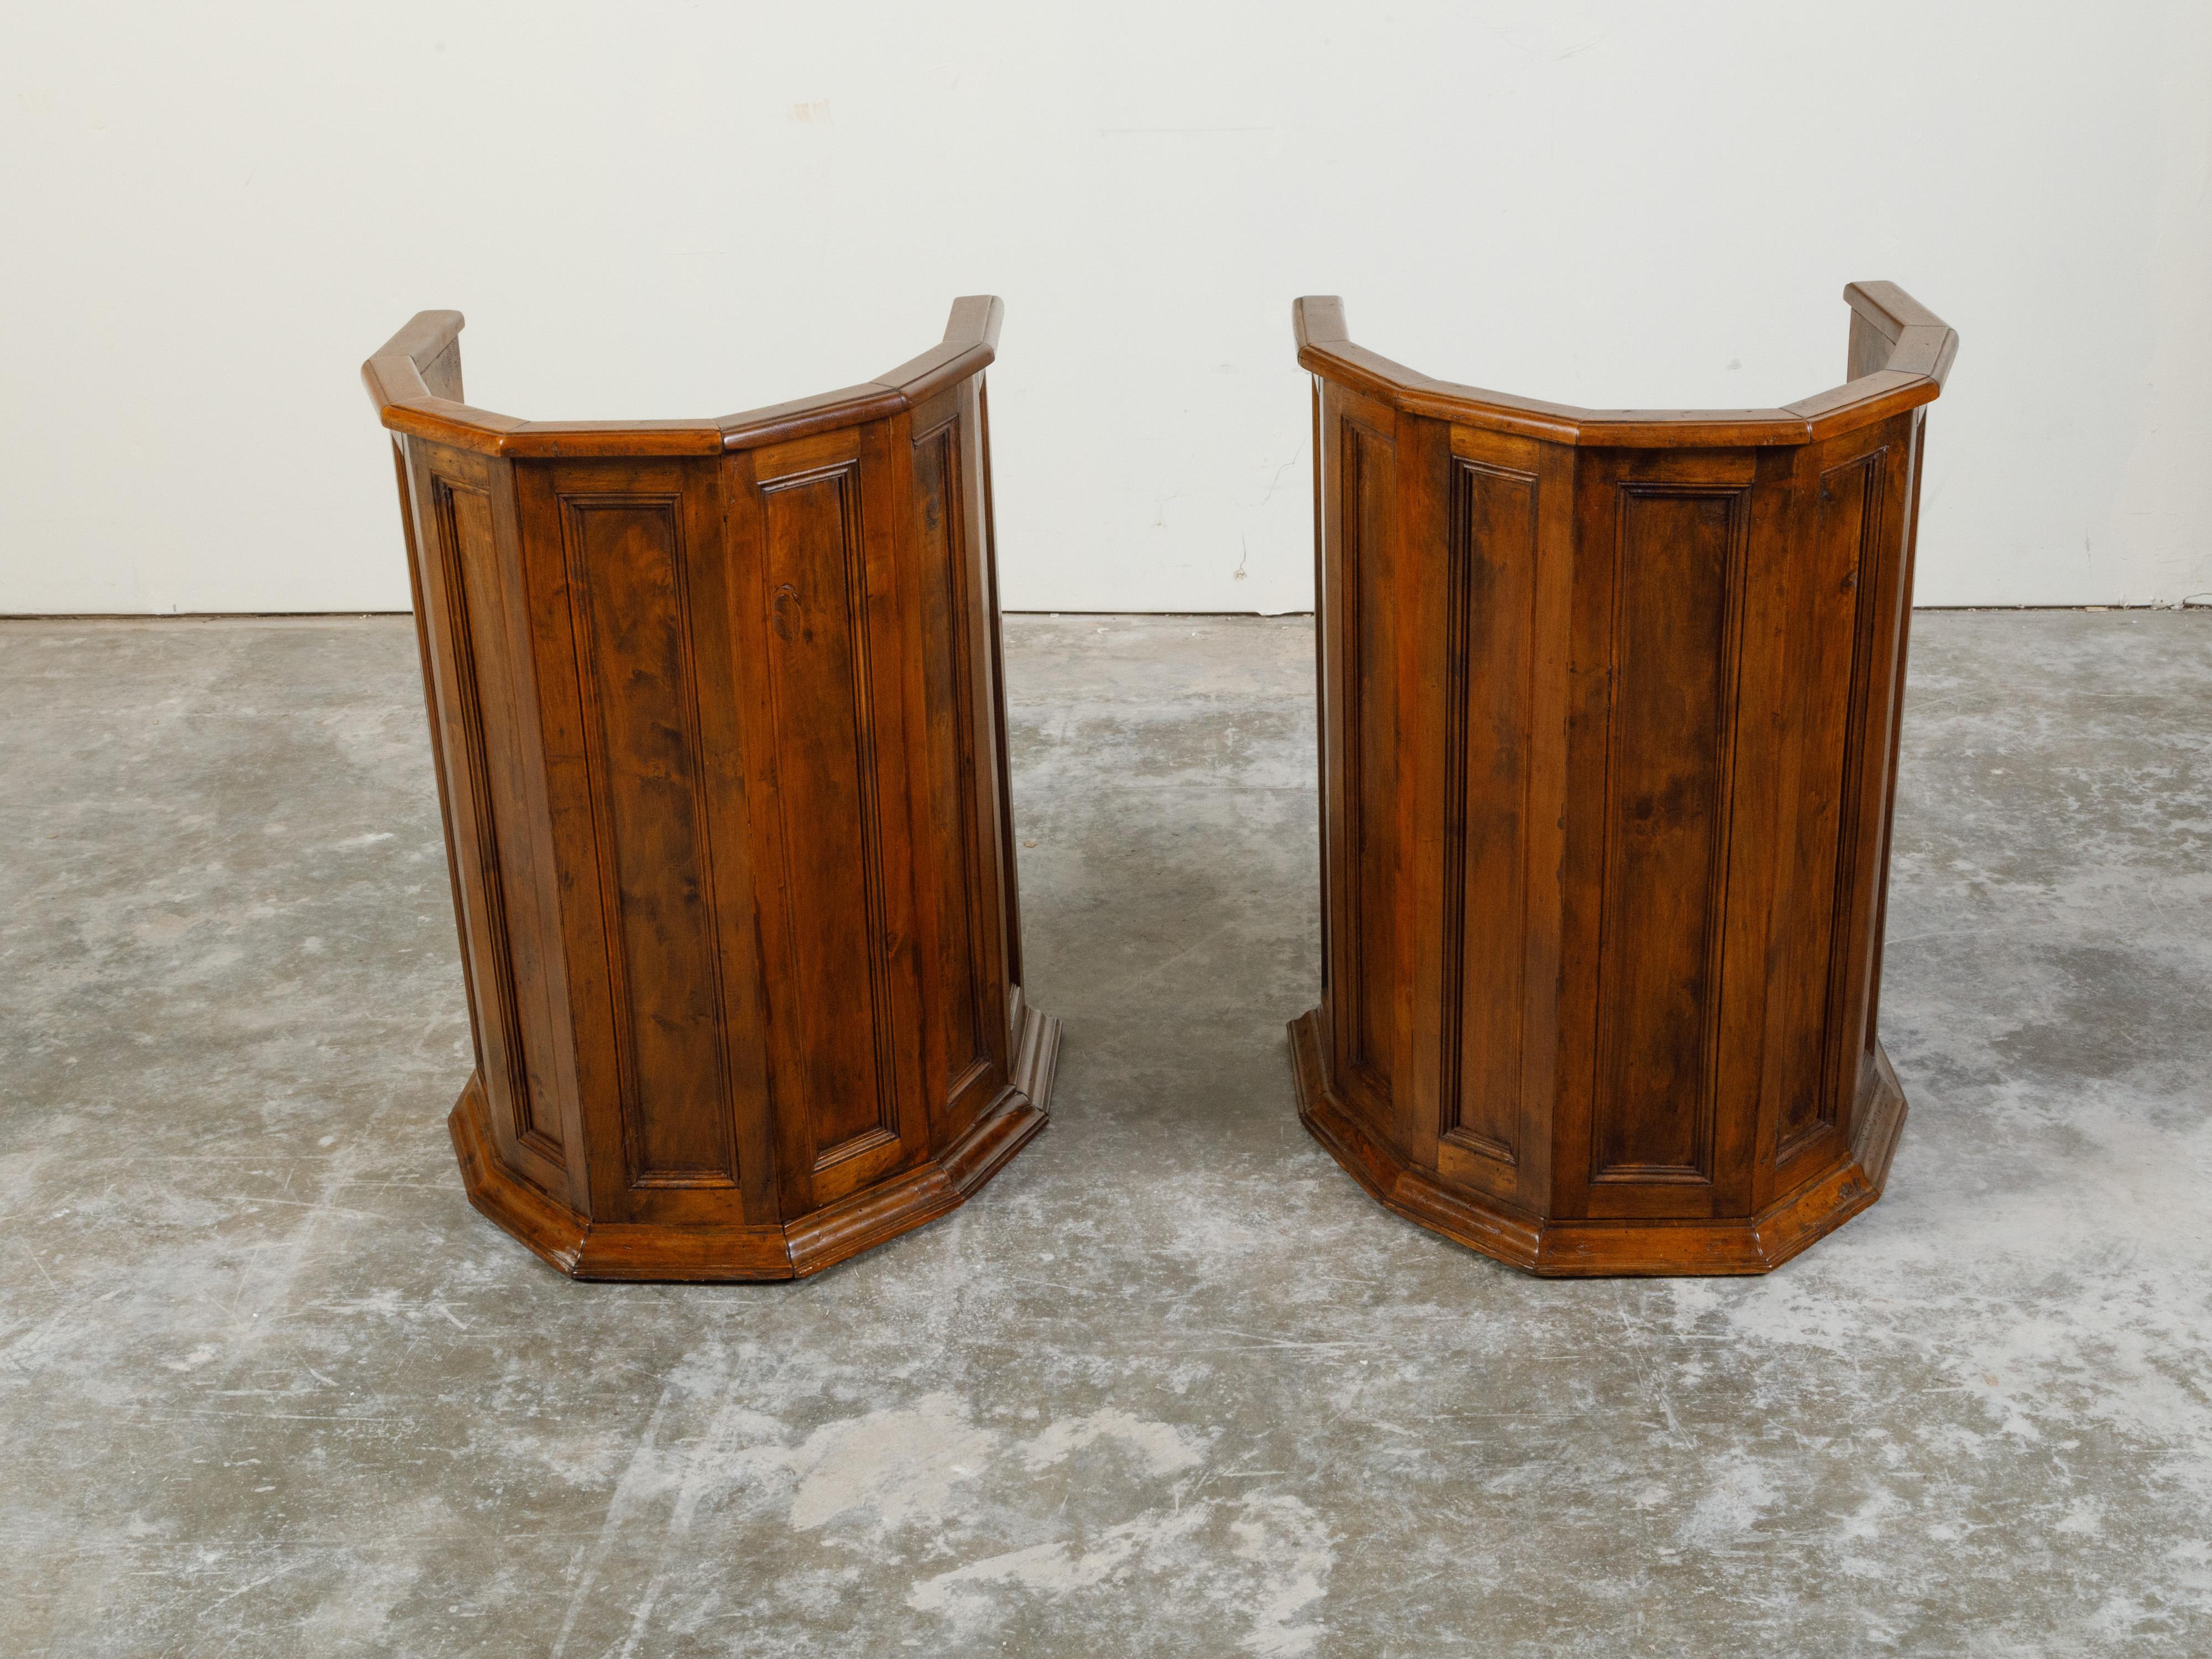 Pair of Italian 19th Century Renaissance Style Wooden Chairs with Lower Doors For Sale 3